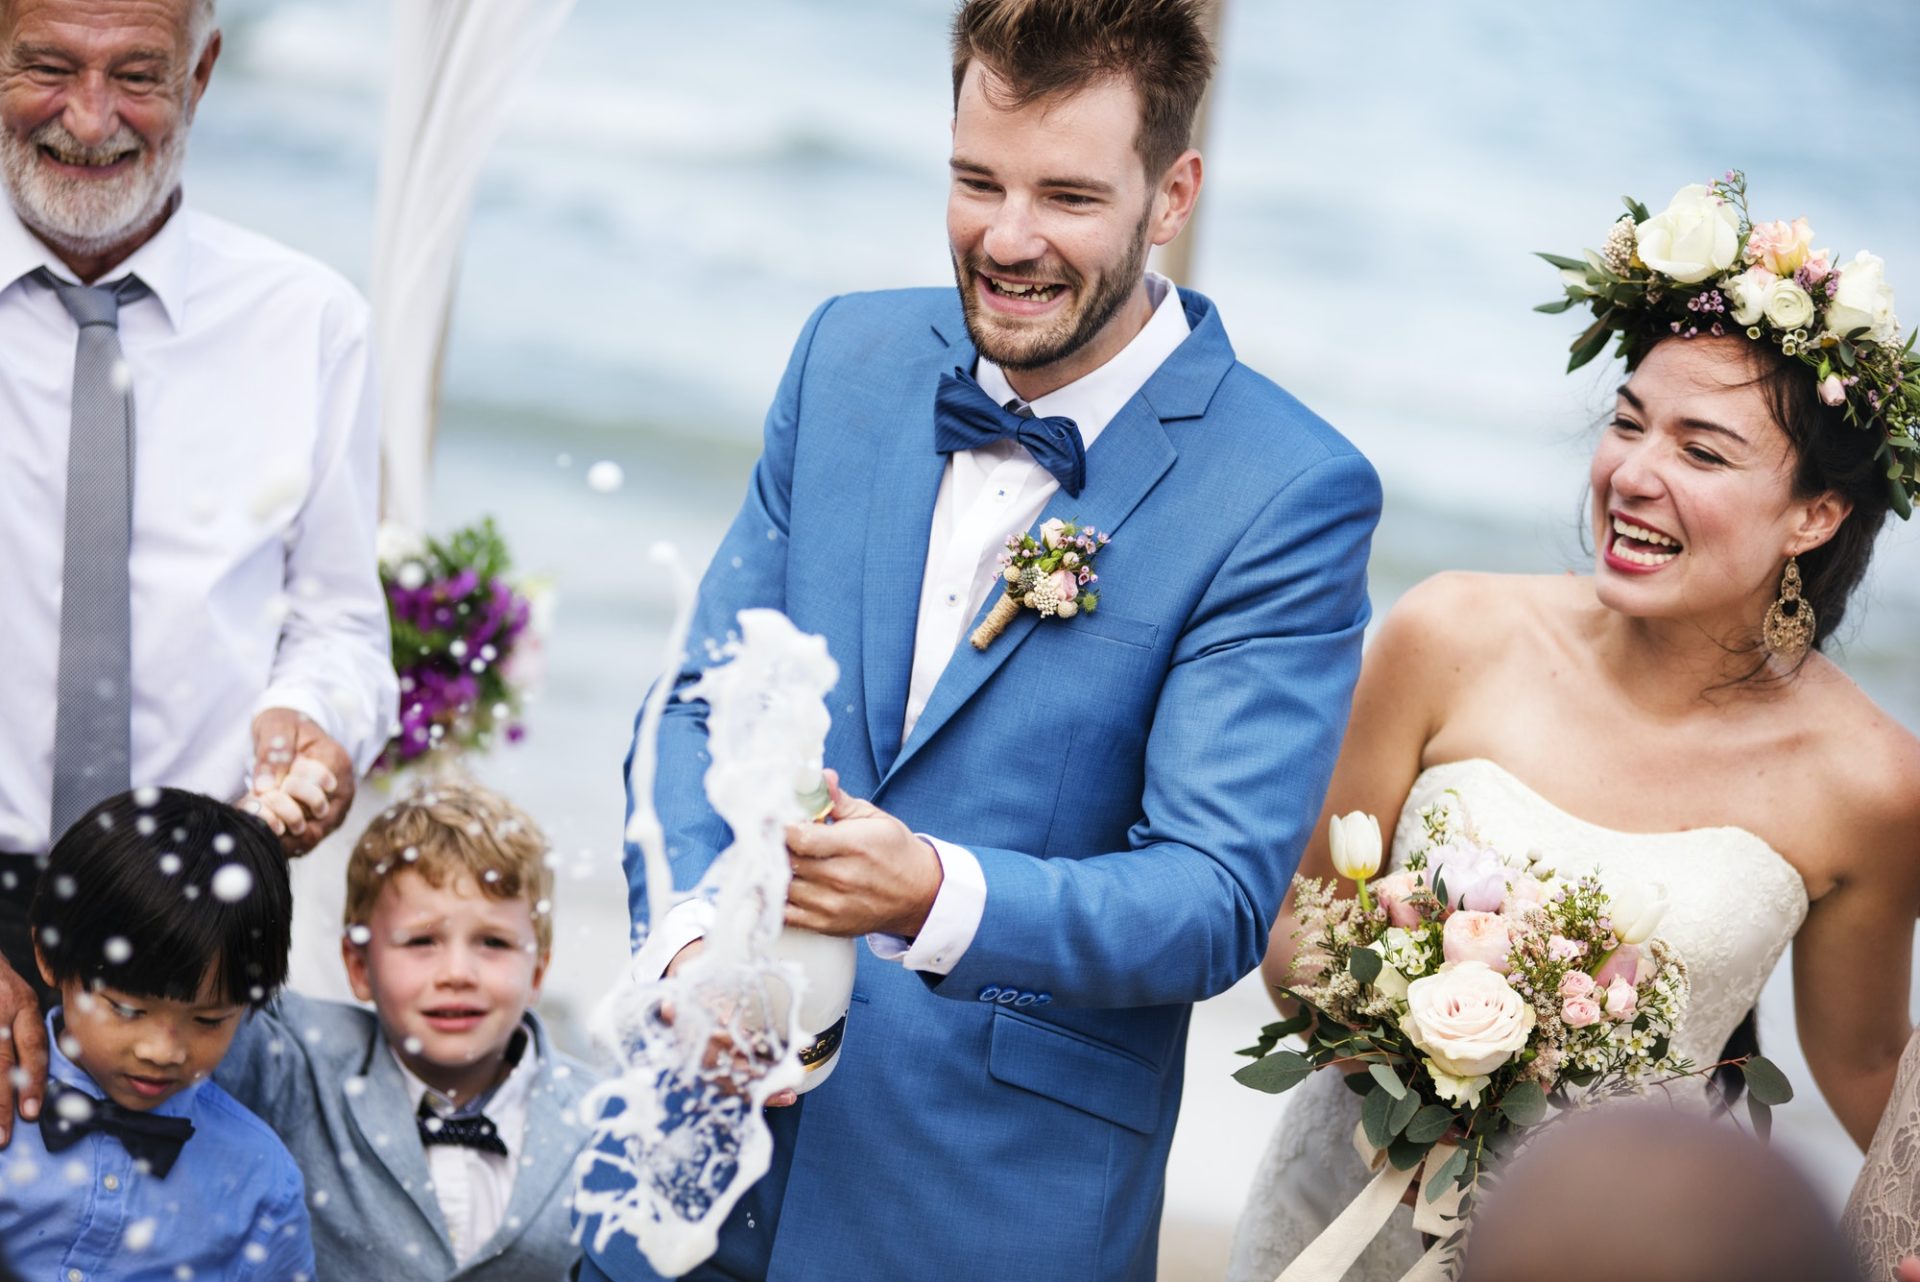 young-couple-in-a-wedding-ceremony-at-the-beach-e1630316228823.jpg